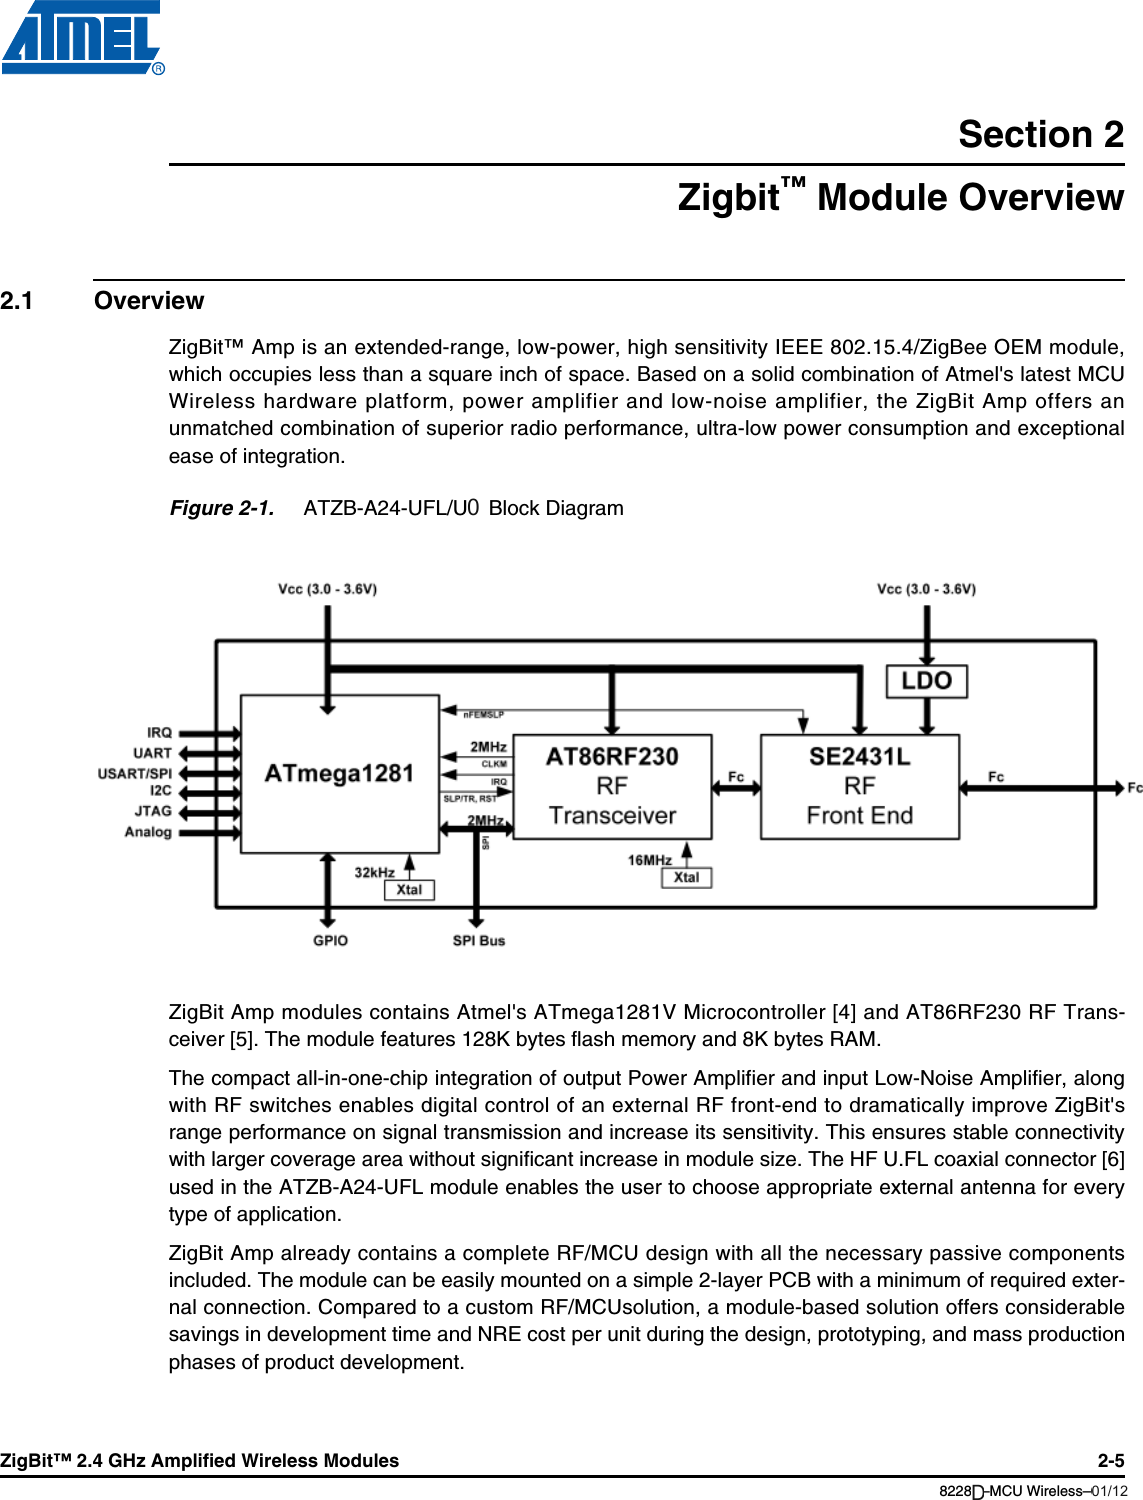 ZigBit™ 2.4 GHz Amplified Wireless Modules 2-58228B–MCU Wireless–06/09Section 2Zigbit™ Module Overview2.1 OverviewZigBit™ Amp is an extended-range, low-power, high sensitivity IEEE 802.15.4/ZigBee OEM module,which occupies less than a square inch of space. Based on a solid combination of Atmel&apos;s latest MCUWireless hardware platform, power amplifier and low-noise amplifier, the ZigBit Amp offers anunmatched combination of superior radio performance, ultra-low power consumption and exceptionalease of integration.Figure 2-1.  ATZB-A24-UFL/UN Block DiagramZigBit Amp modules contains Atmel&apos;s ATmega1281V Microcontroller [4] and AT86RF230 RF Trans-ceiver [5]. The module features 128K bytes flash memory and 8K bytes RAM.The compact all-in-one-chip integration of output Power Amplifier and input Low-Noise Amplifier, alongwith RF switches enables digital control of an external RF front-end to dramatically improve ZigBit&apos;srange performance on signal transmission and increase its sensitivity. This ensures stable connectivitywith larger coverage area without significant increase in module size. The HF U.FL coaxial connector [6]used in the ATZB-A24-UFL module enables the user to choose appropriate external antenna for everytype of application.ZigBit Amp already contains a complete RF/MCU design with all the necessary passive componentsincluded. The module can be easily mounted on a simple 2-layer PCB with a minimum of required exter-nal connection. Compared to a custom RF/MCUsolution, a module-based solution offers considerablesavings in development time and NRE cost per unit during the design, prototyping, and mass productionphases of product development.ATmega1281AT86RF230RFTransceiverVCC (1.8 - 3.6V)GPIO SPI BusIRQUARTUSART/SPII2CJTAGANALOGSW SWLNAPARFI/OAntenna001/12D